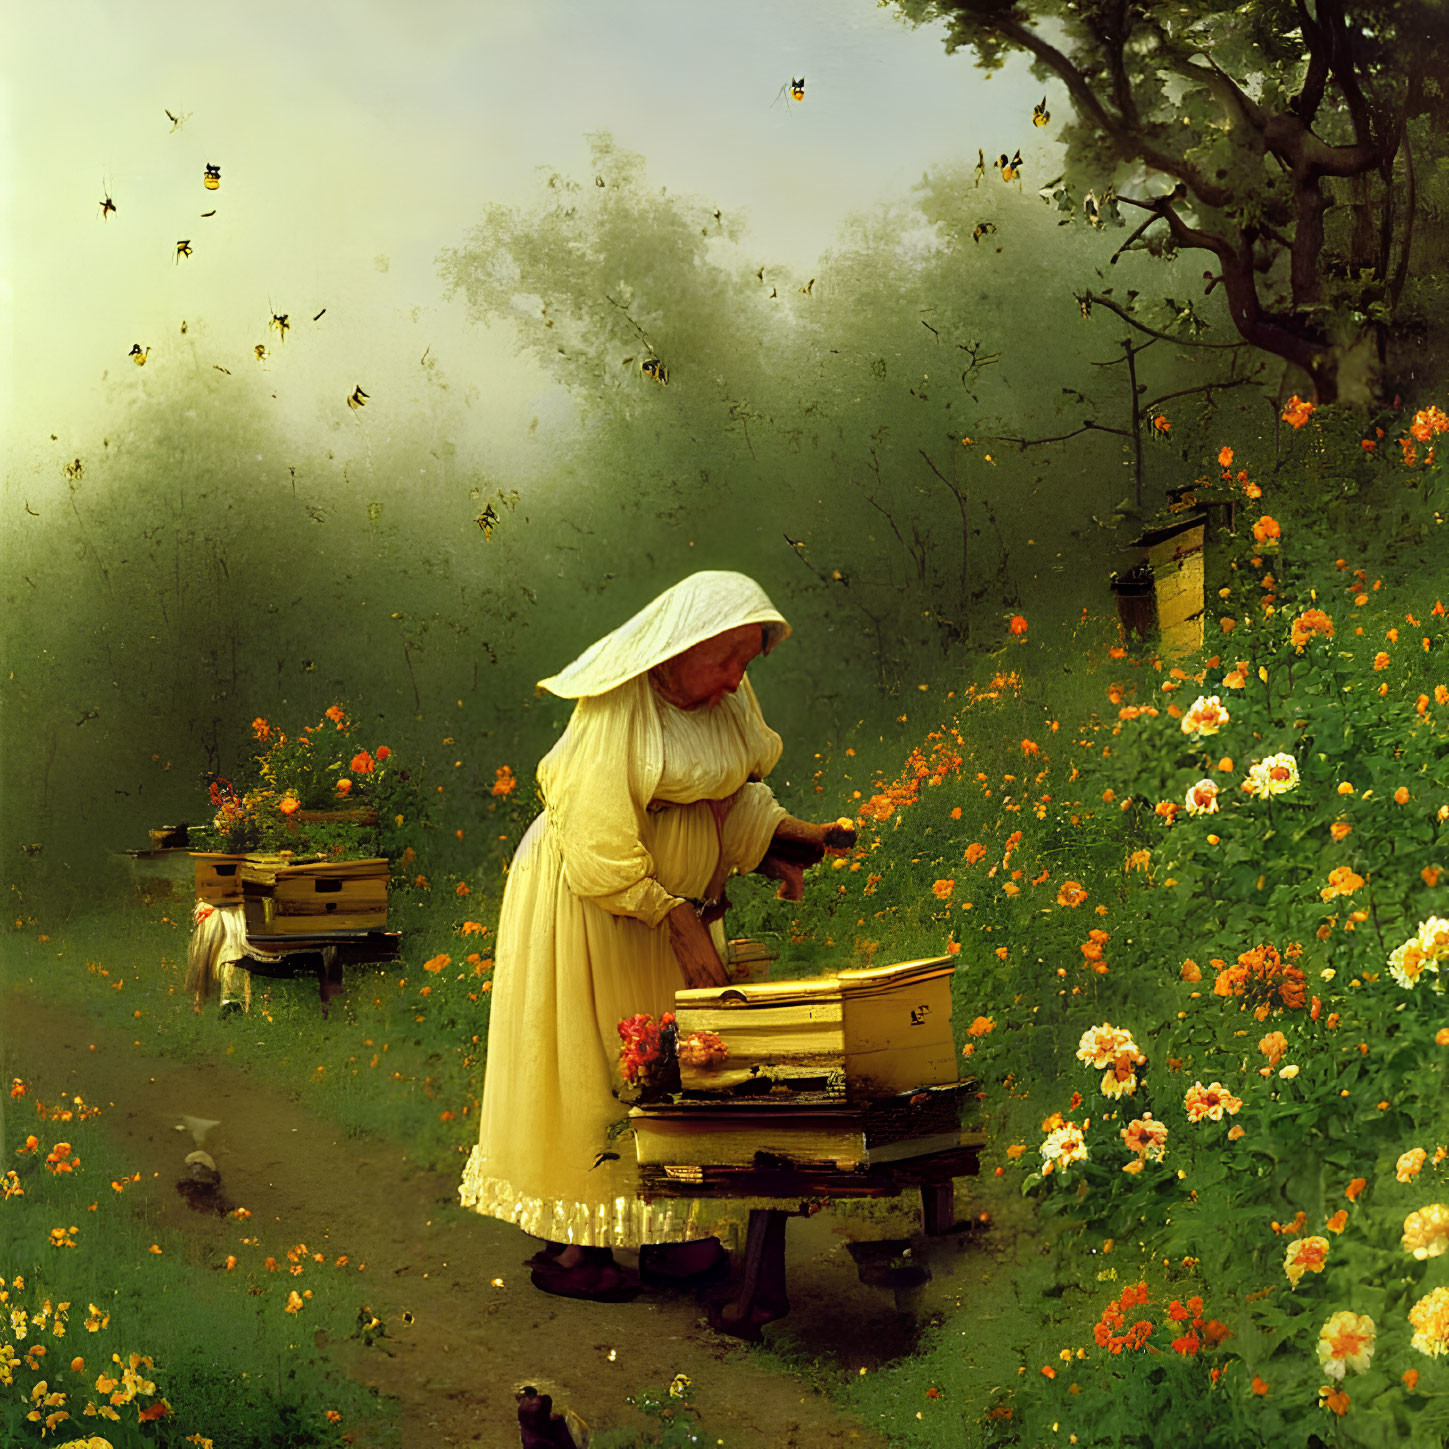 Woman tending bee hives in vintage attire surrounded by blooming flowers and bees in misty garden